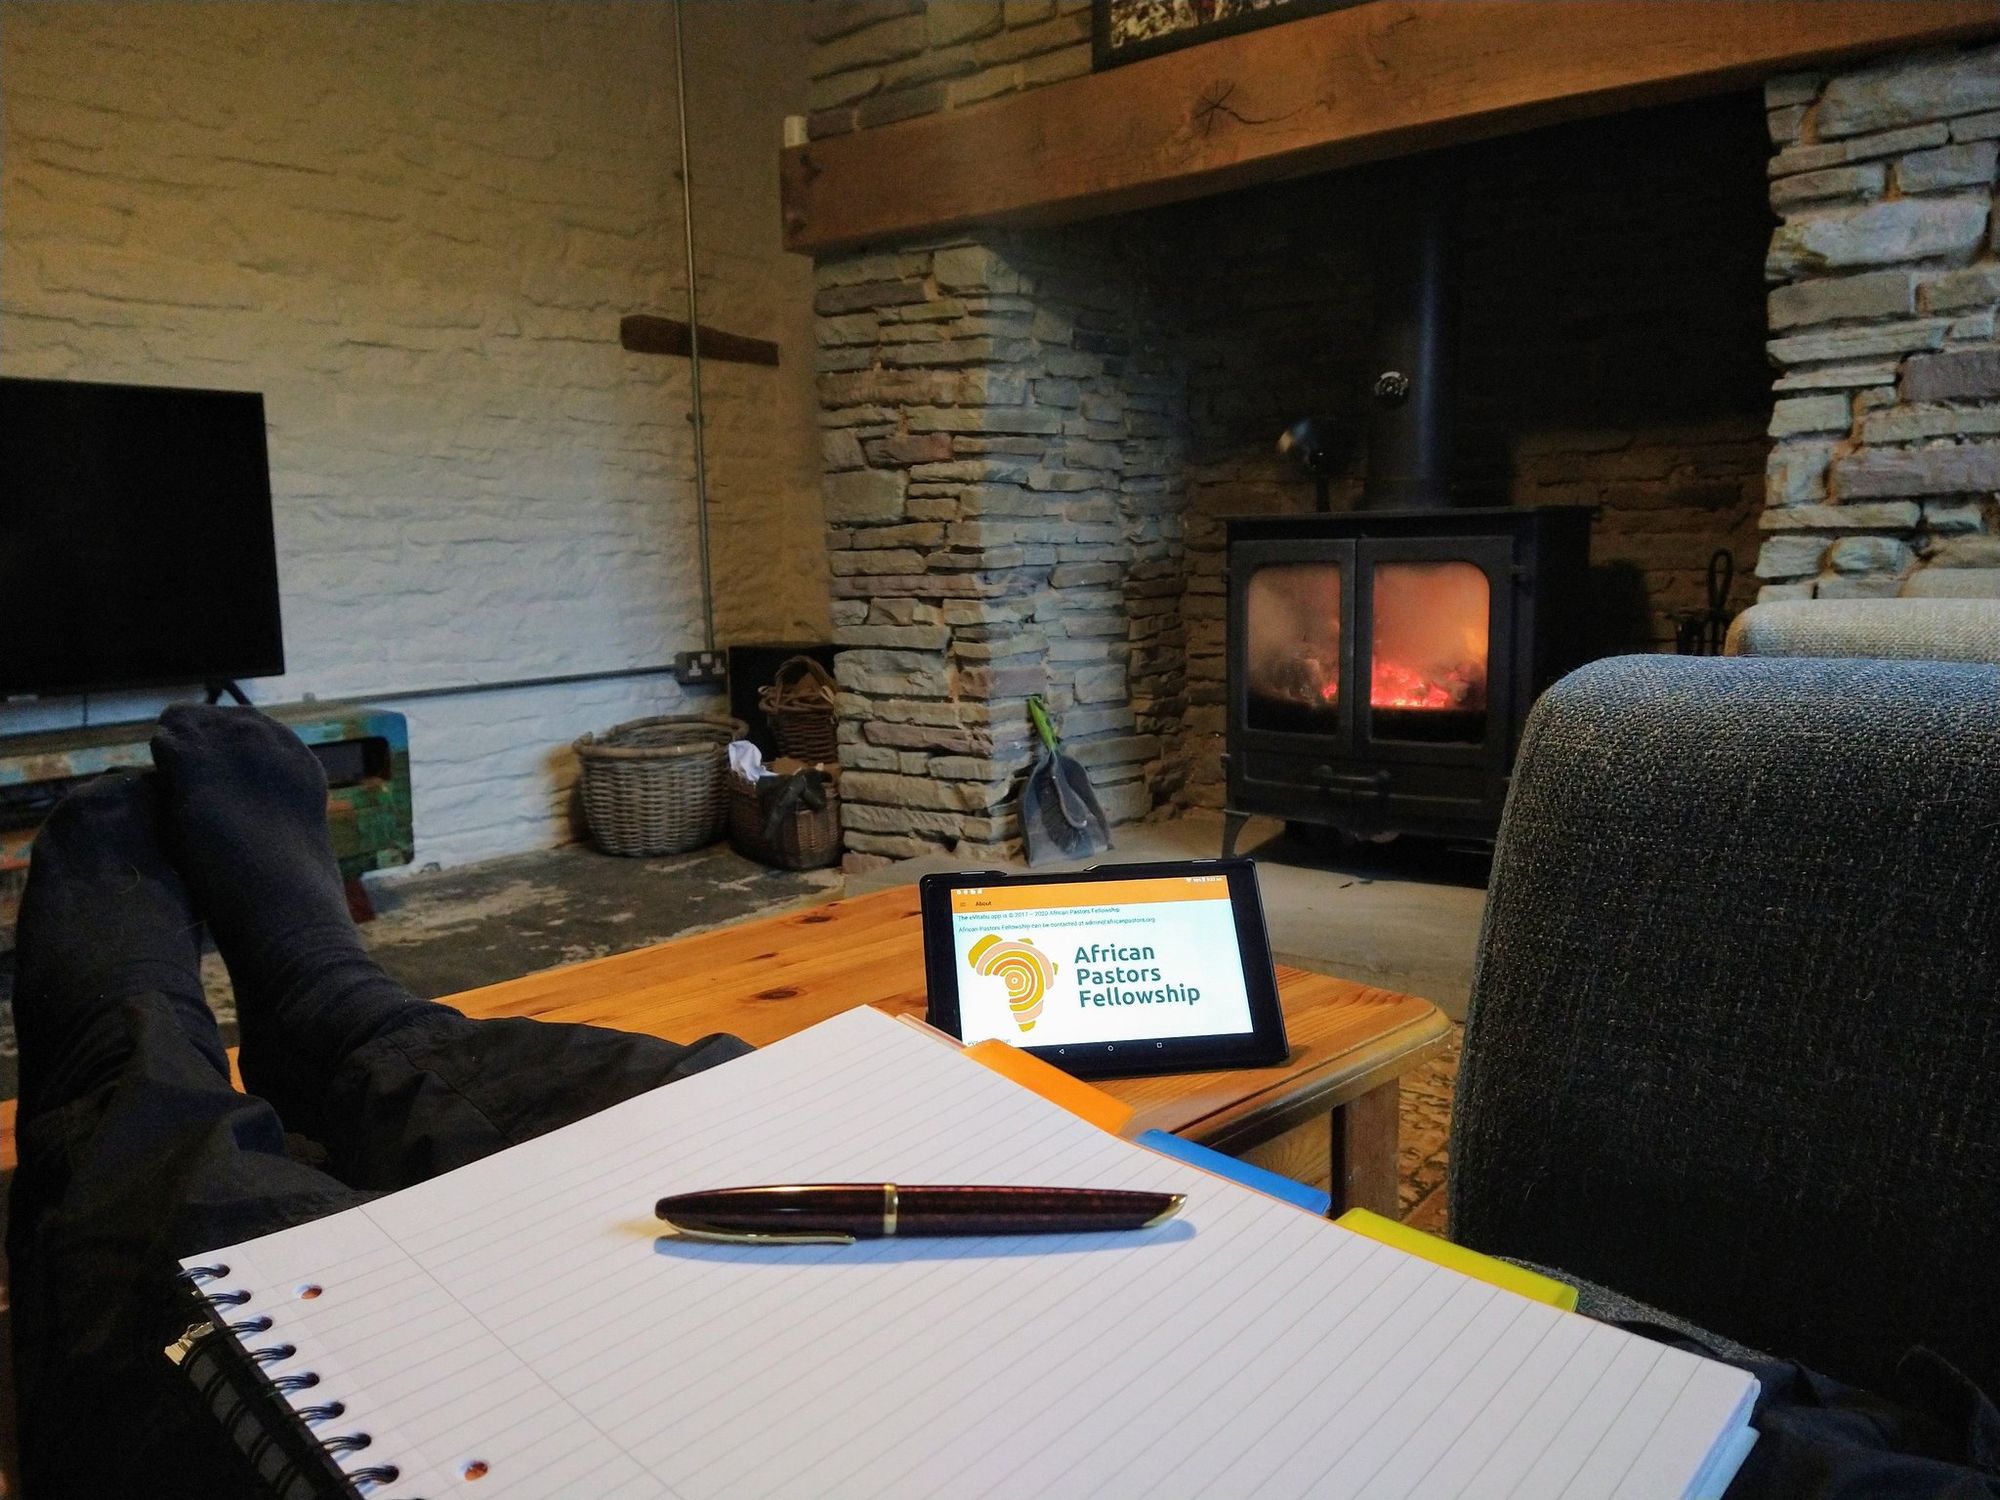 A lit log burning stove in a fire place, with a table in front of it.  In the foreground is a notepad and pen resting on a person's outstretched legs.